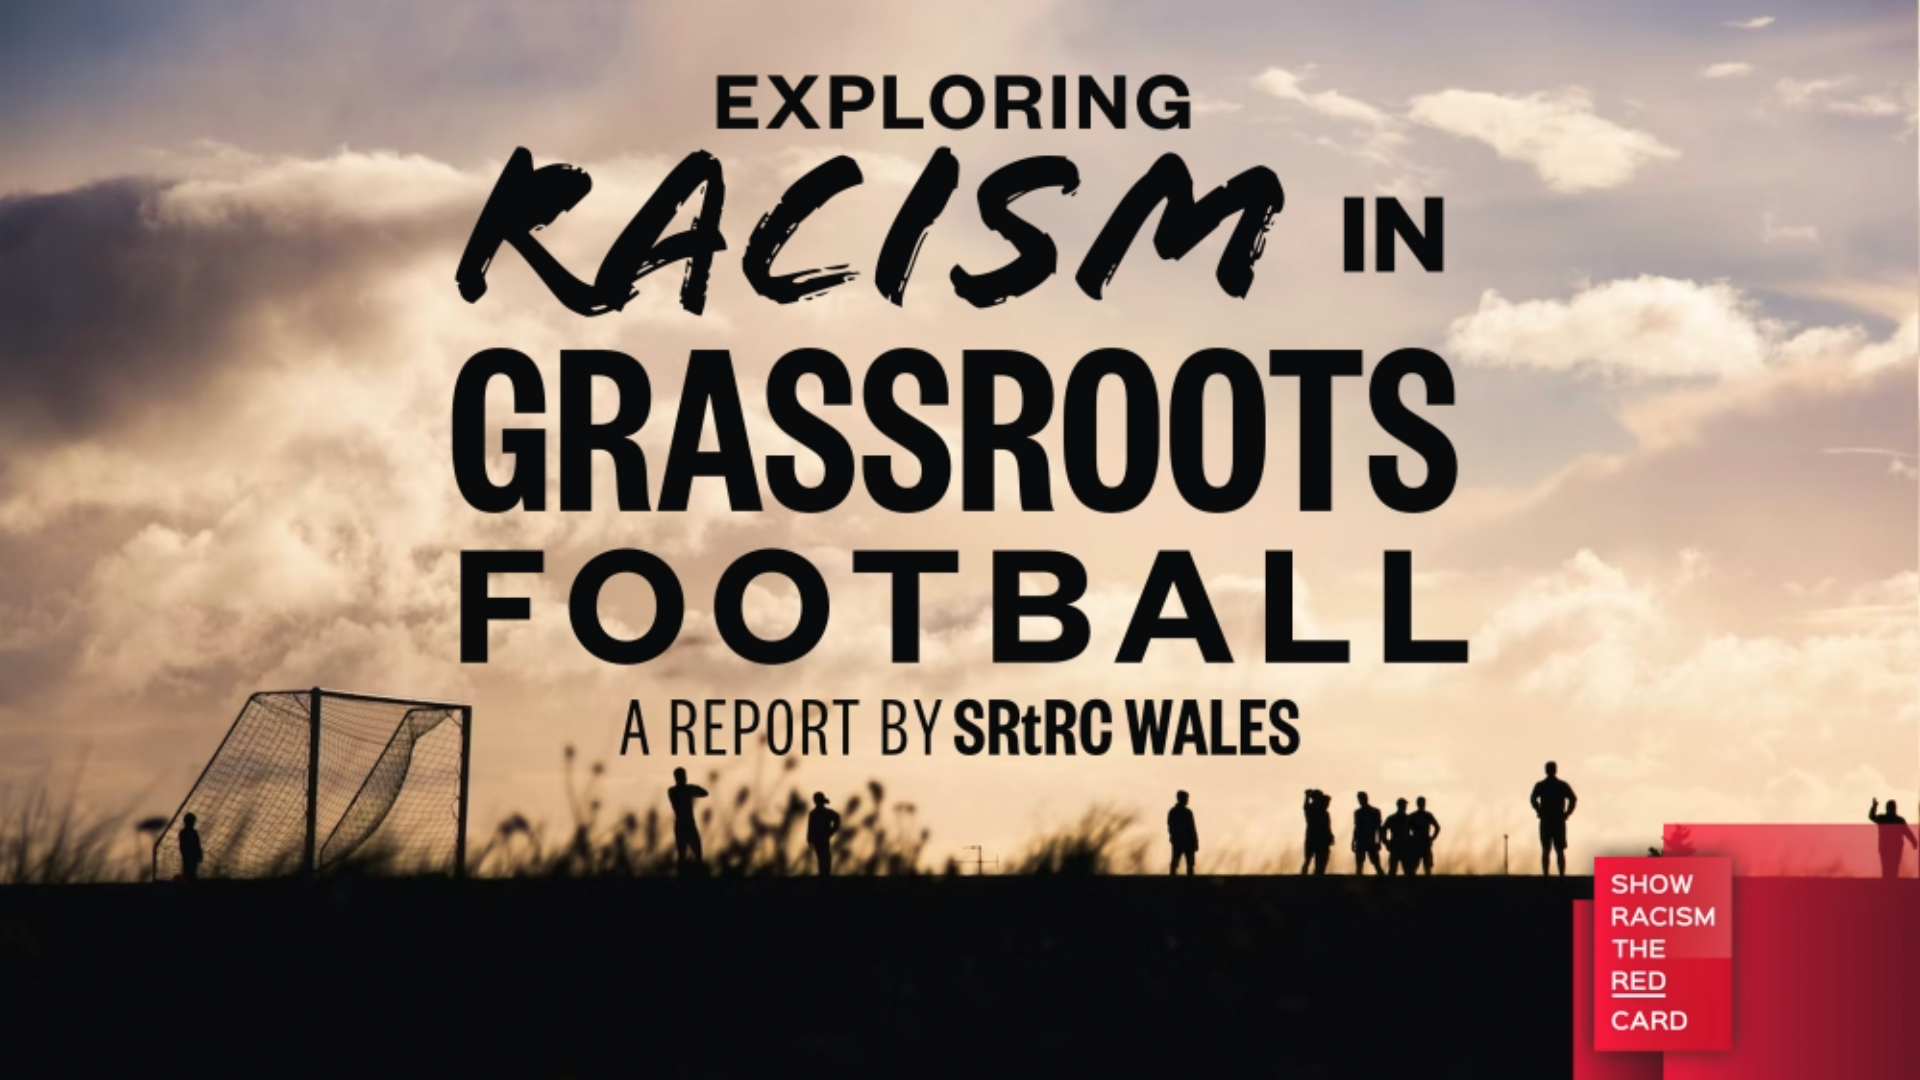 SRtRC Wales – Racism in Grassroots Football Report